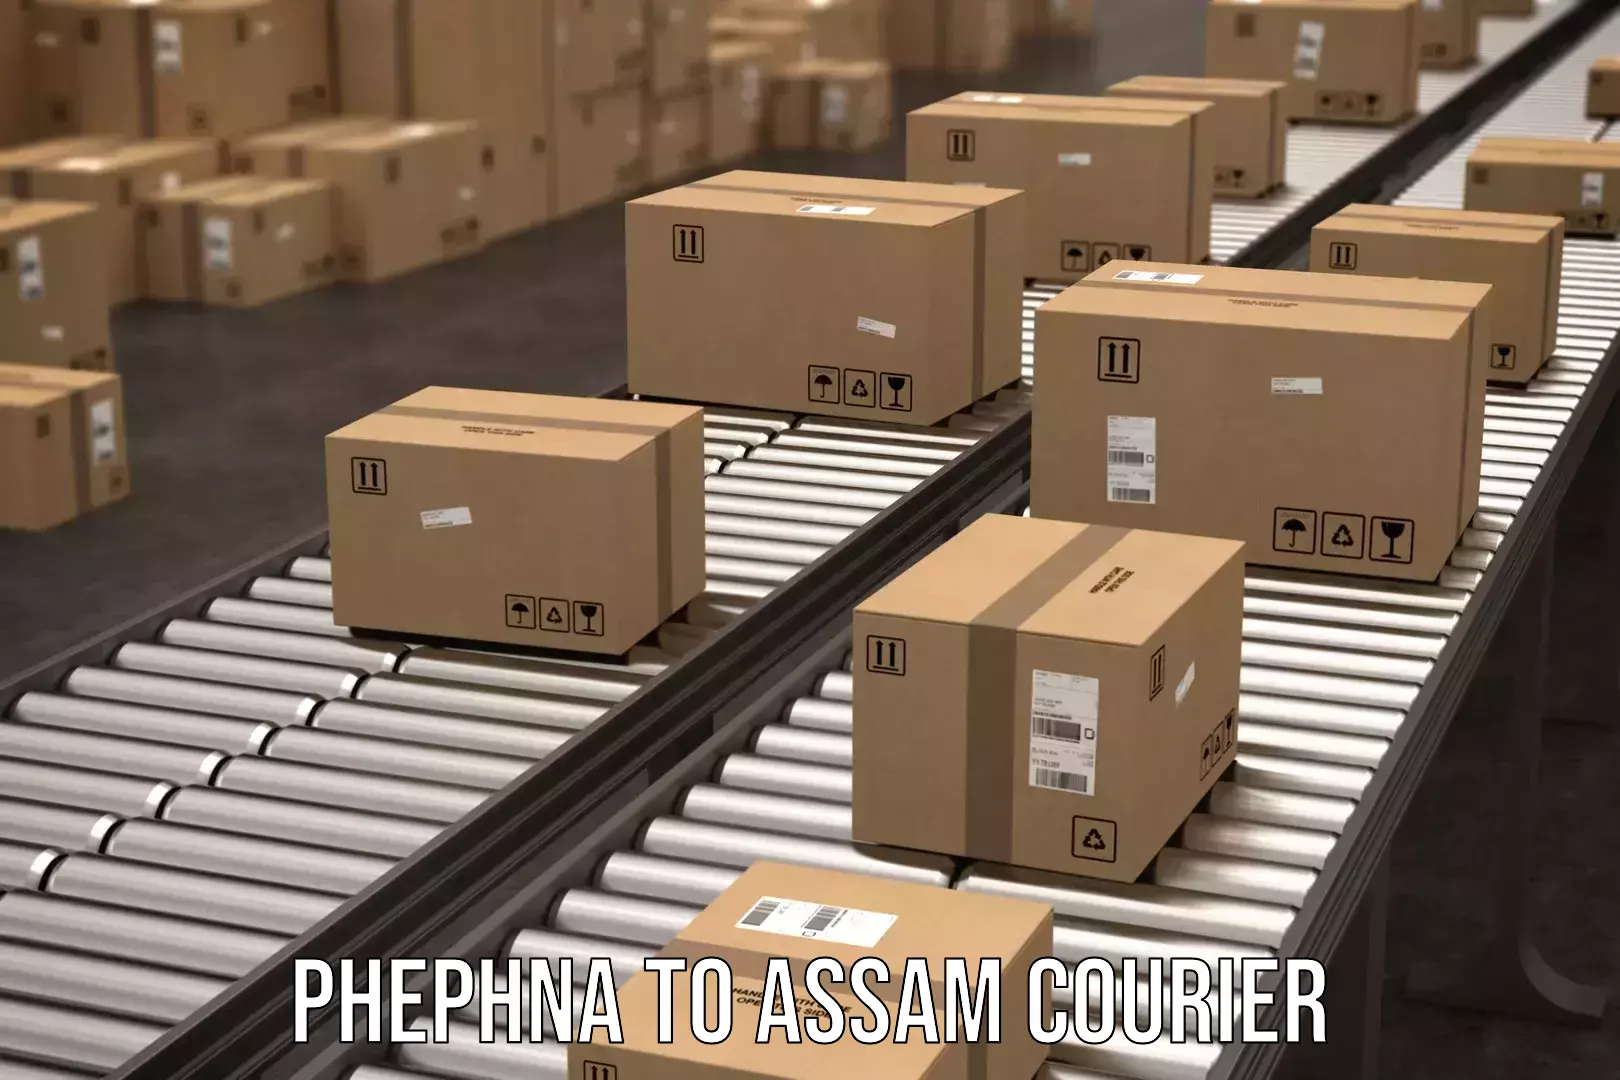 Efficient package consolidation Phephna to Assam